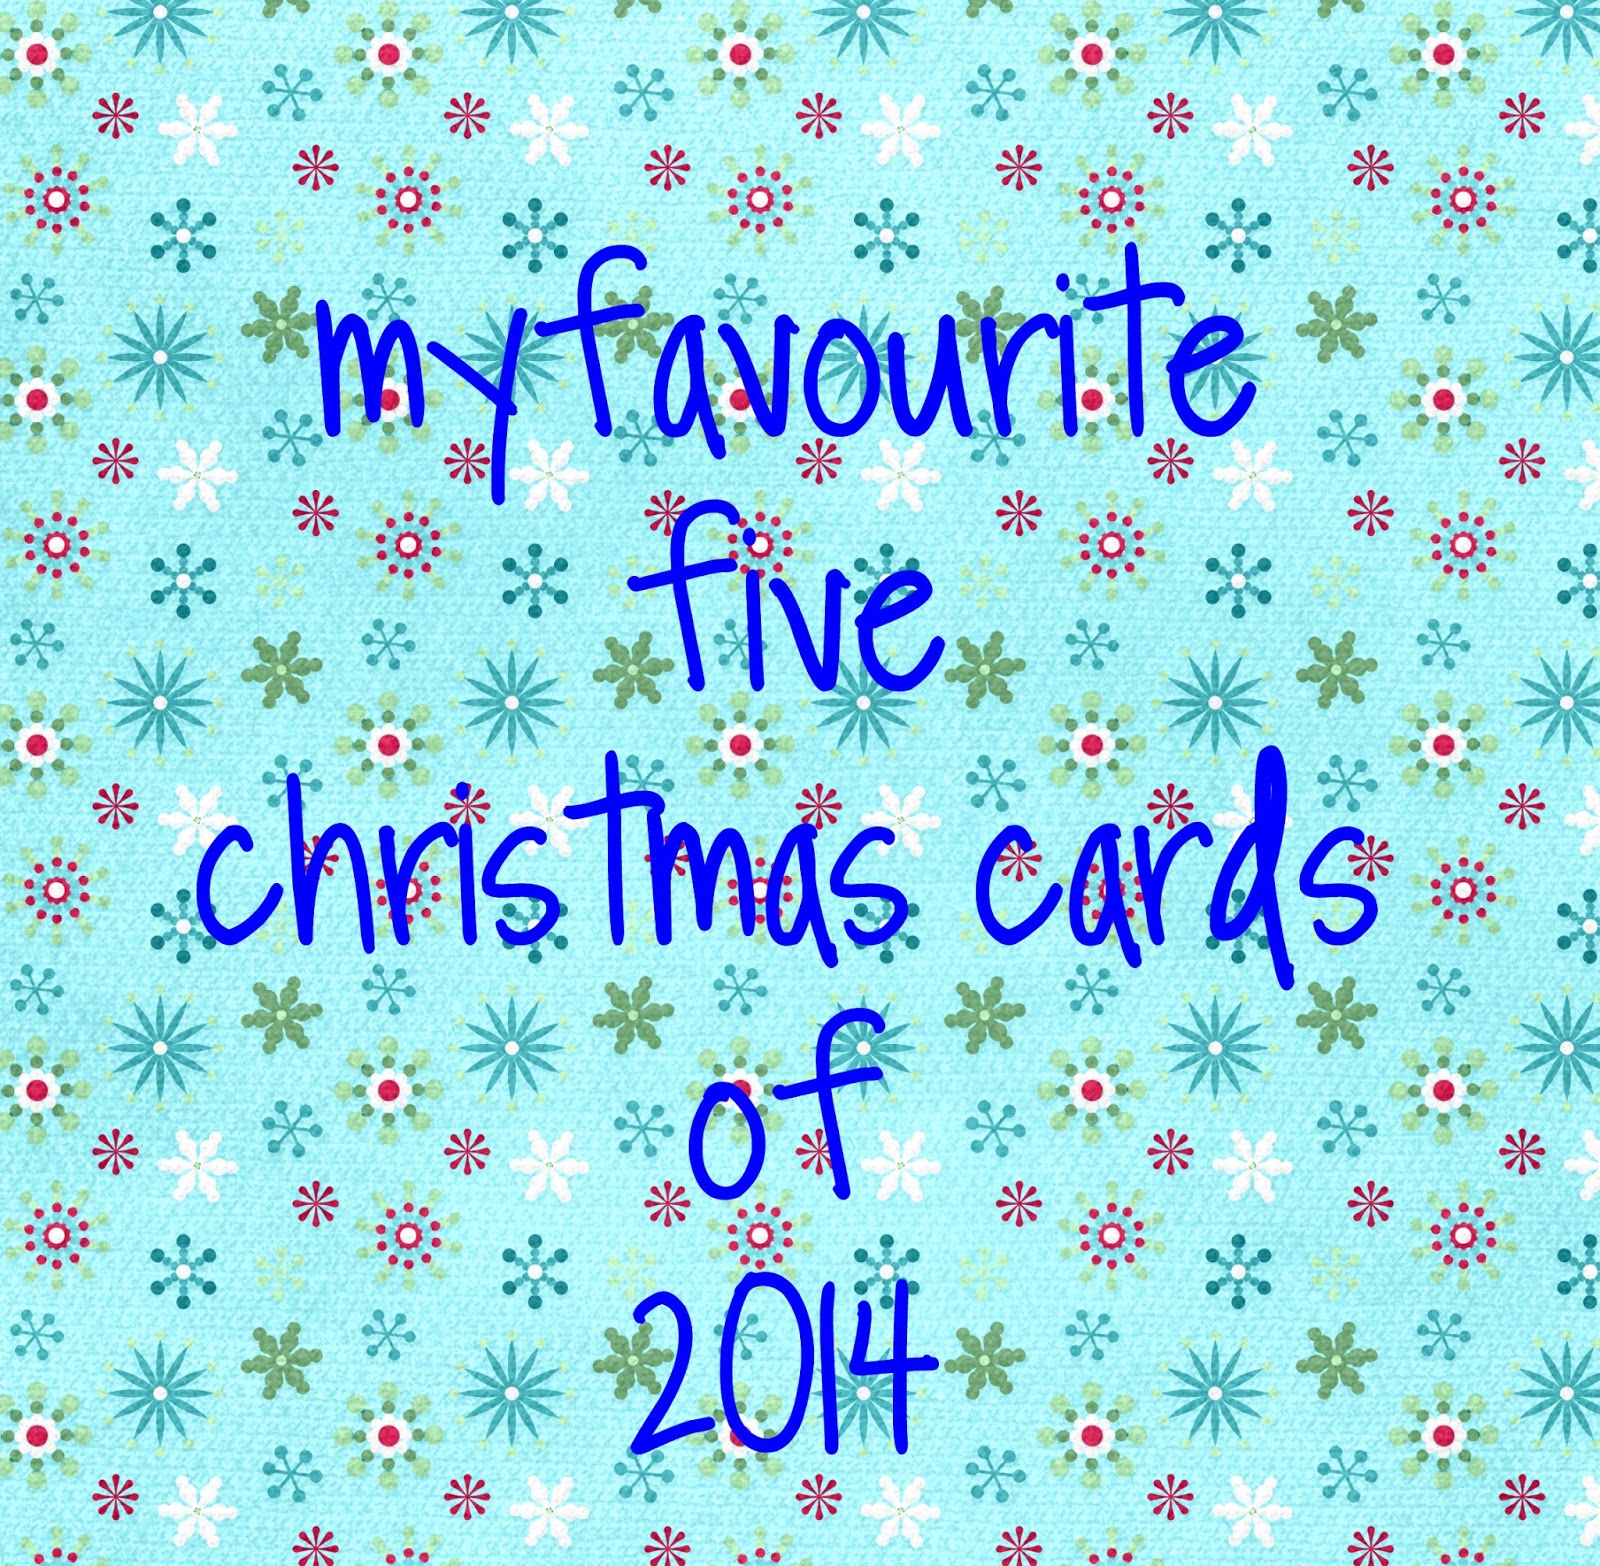 http://debby4000.blogspot.co.uk/2014/12/my-favourite-five-christmas-cards-of.html